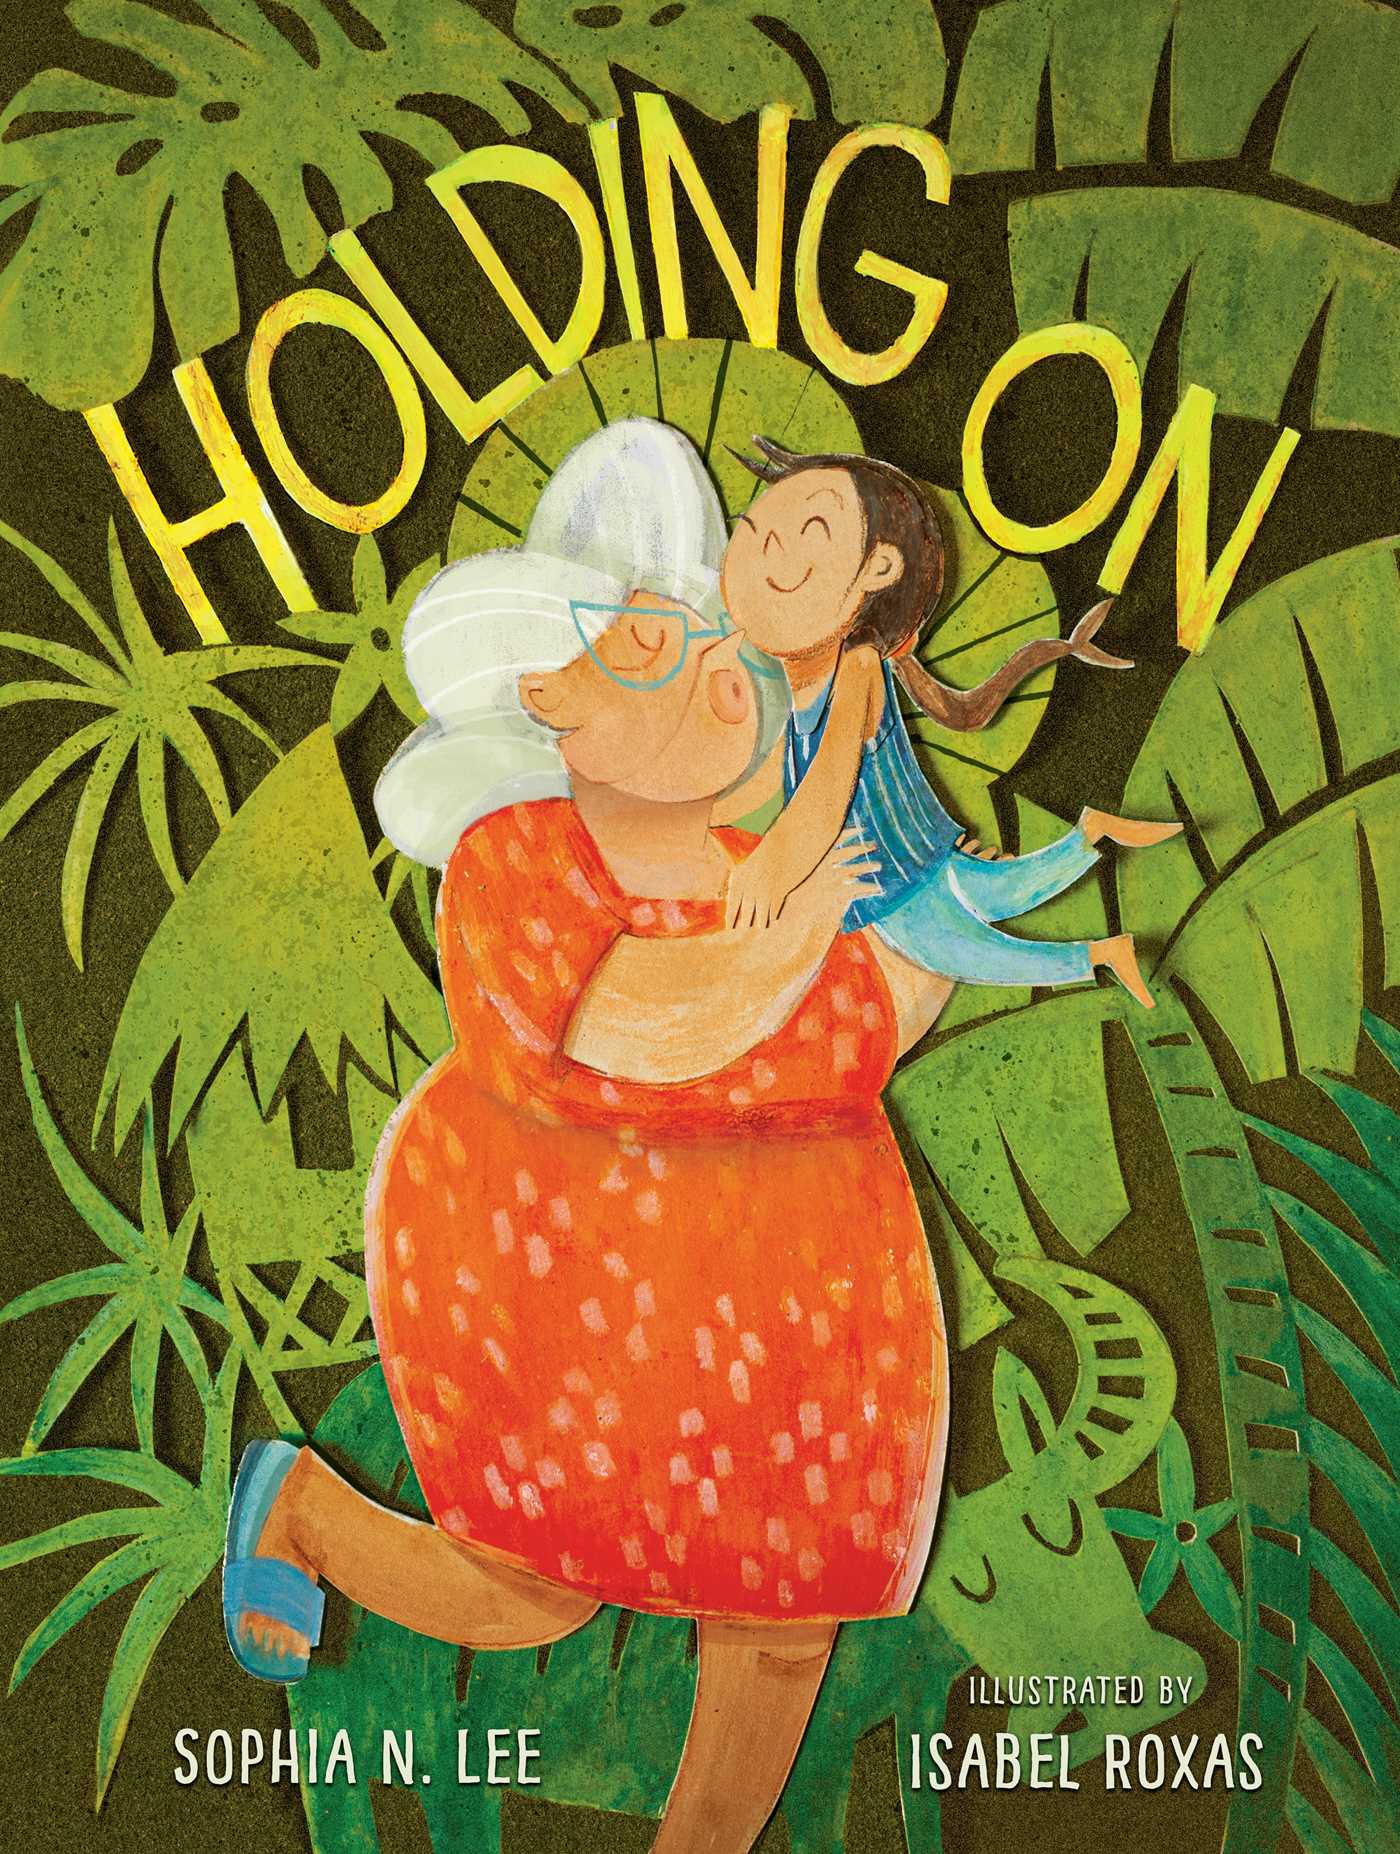 Interview with Holding On creators Sophia N. Lee & Isabel Roxas